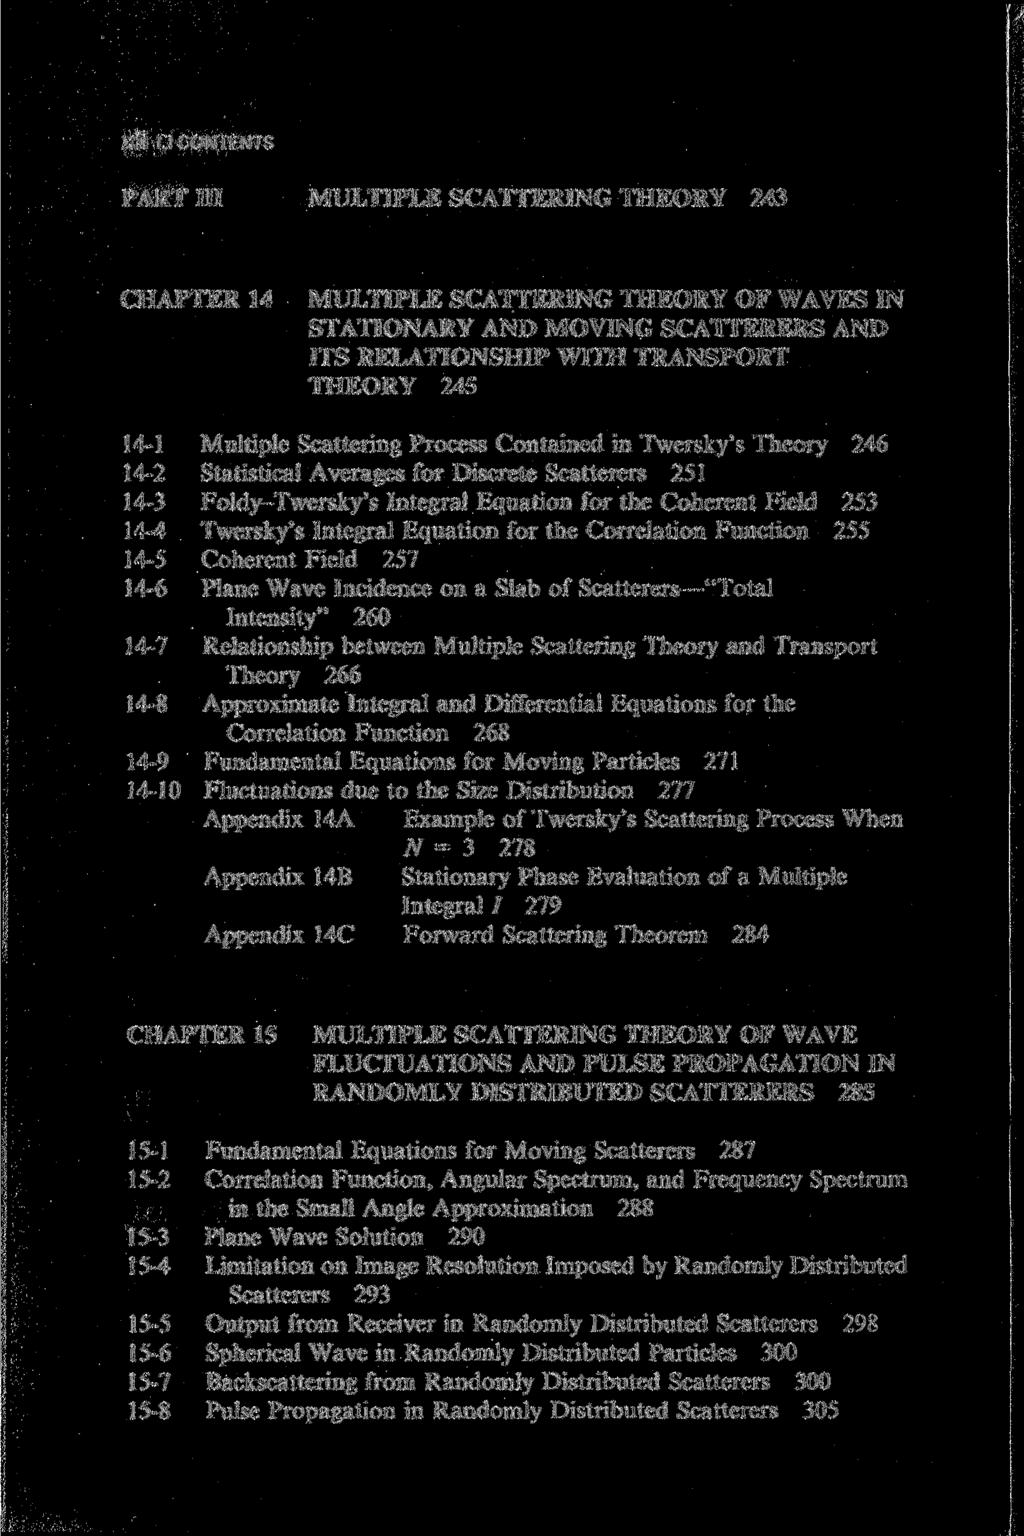 XII D CONTENTS PART III MULTIPLE SCATTERING THEORY 243 CHAPTER 14 MULTIPLE SCATTERING THEORY OF WAVES IN STATIONARY AND MOVING SCATTERERS AND ITS RELATIONSHIP WITH TRANSPORT THEORY 245 14-1 Multiple